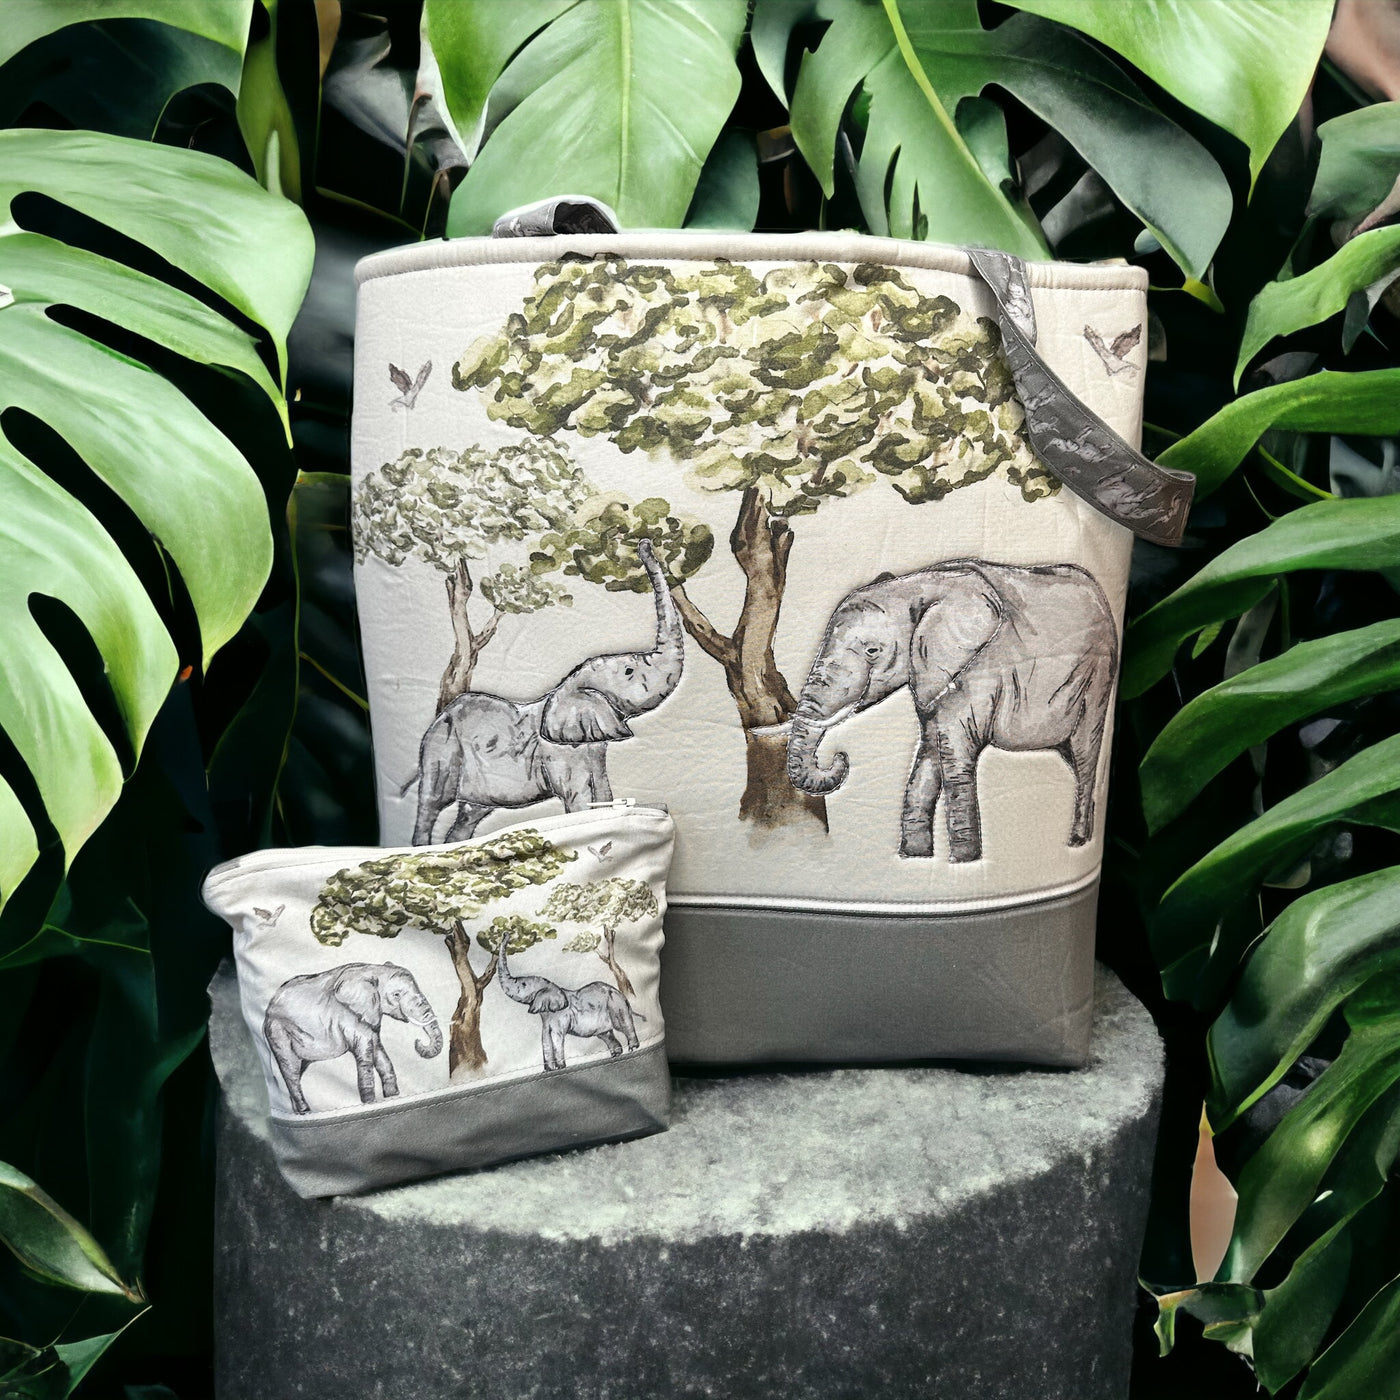 The Totally Tote - Elephants Kit